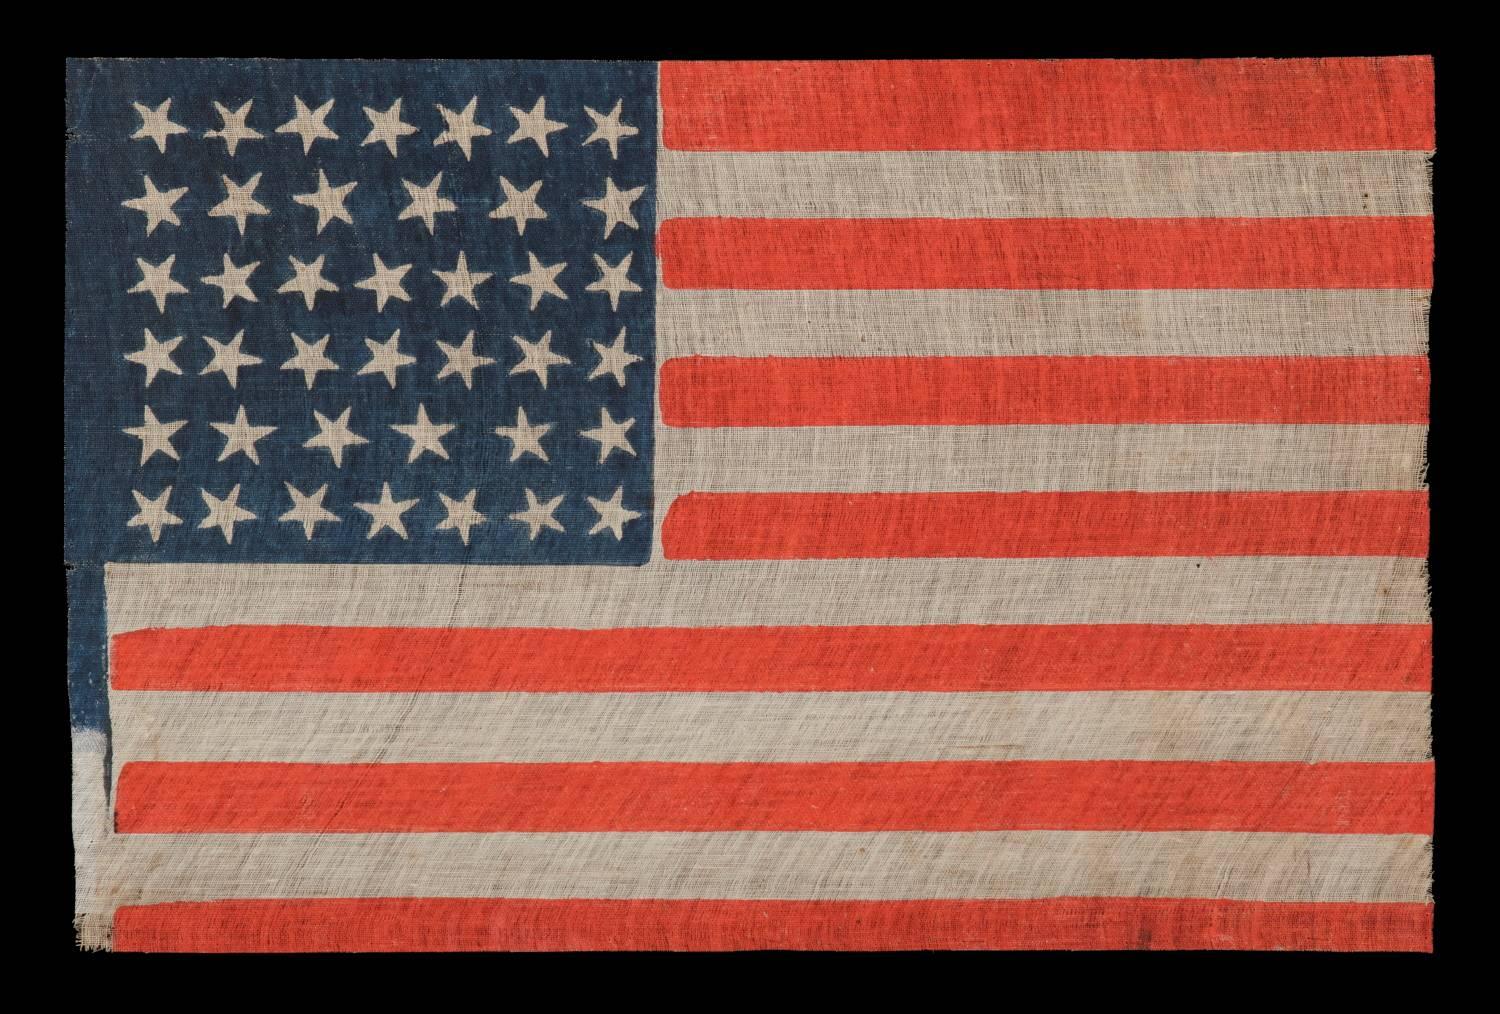 40 STARS, AN EXTREMELY SCARCE EXAMPLE AND AN UNOFFICIAL STAR COUNT, ACCURATE FOR JUST SIX DAYS, SOUTH DAKOTA STATEHOOD, 1889: 

40 star American national parade flag, printed on coarse, glazed cotton. During the 3rd quarter of the 19th century, it